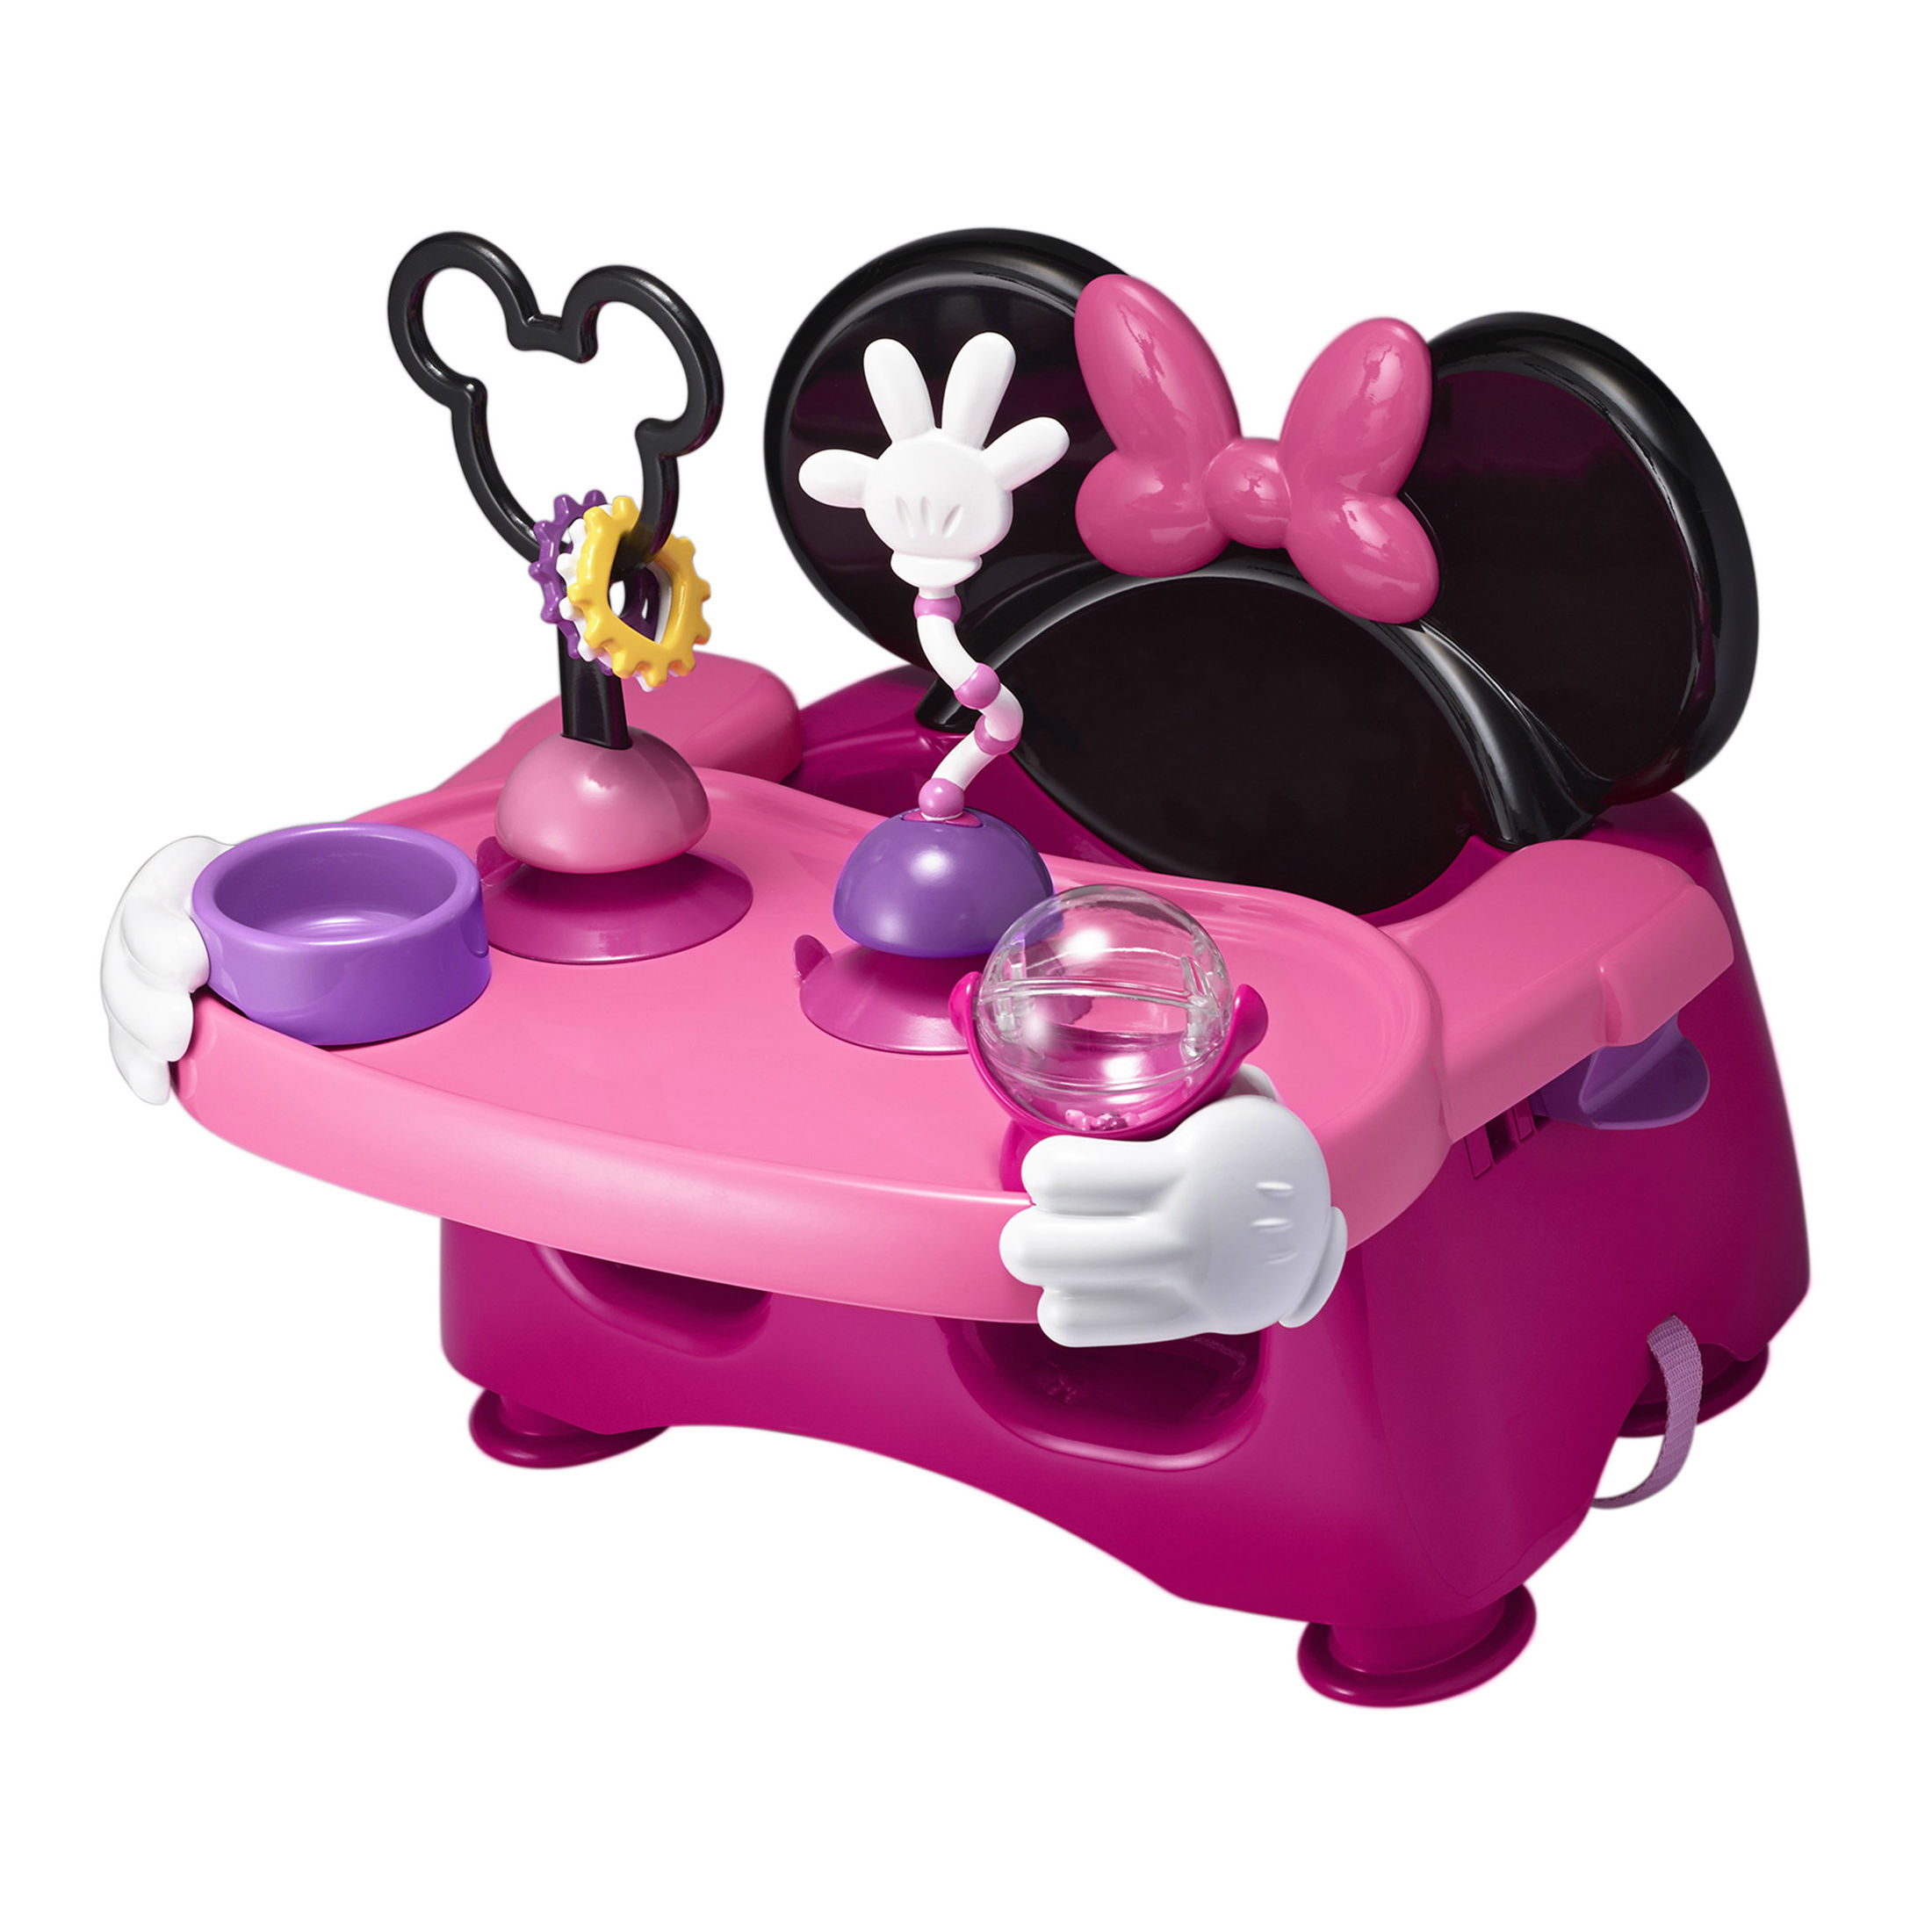 Images of Minnie Mouse | 2200x2200